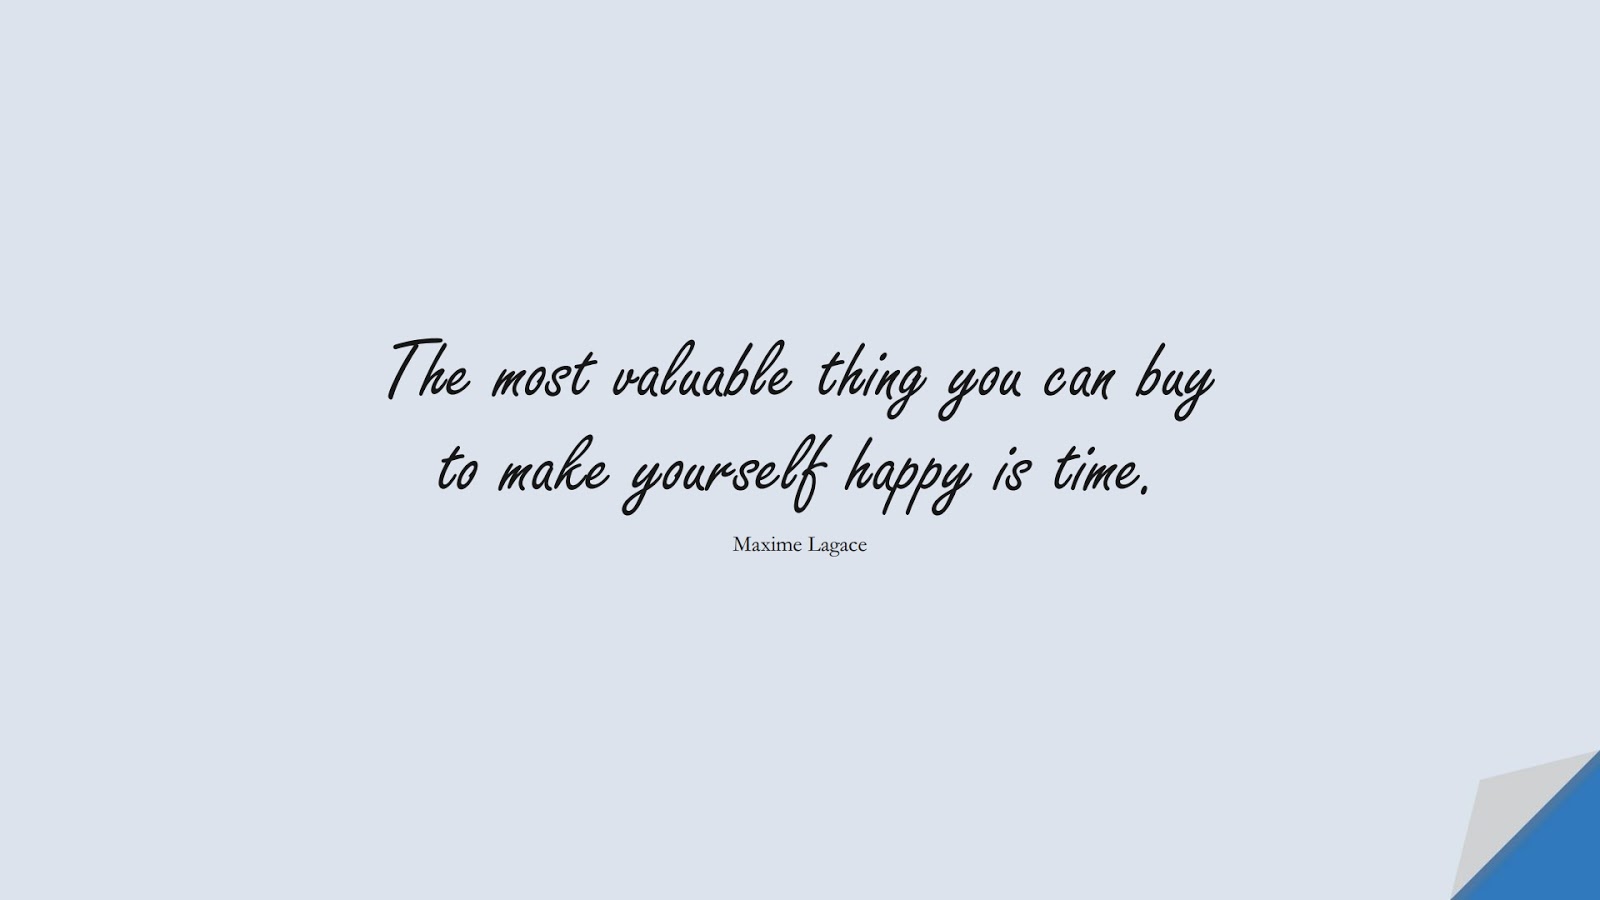 The most valuable thing you can buy to make yourself happy is time. (Maxime Lagace);  #HappinessQuotes